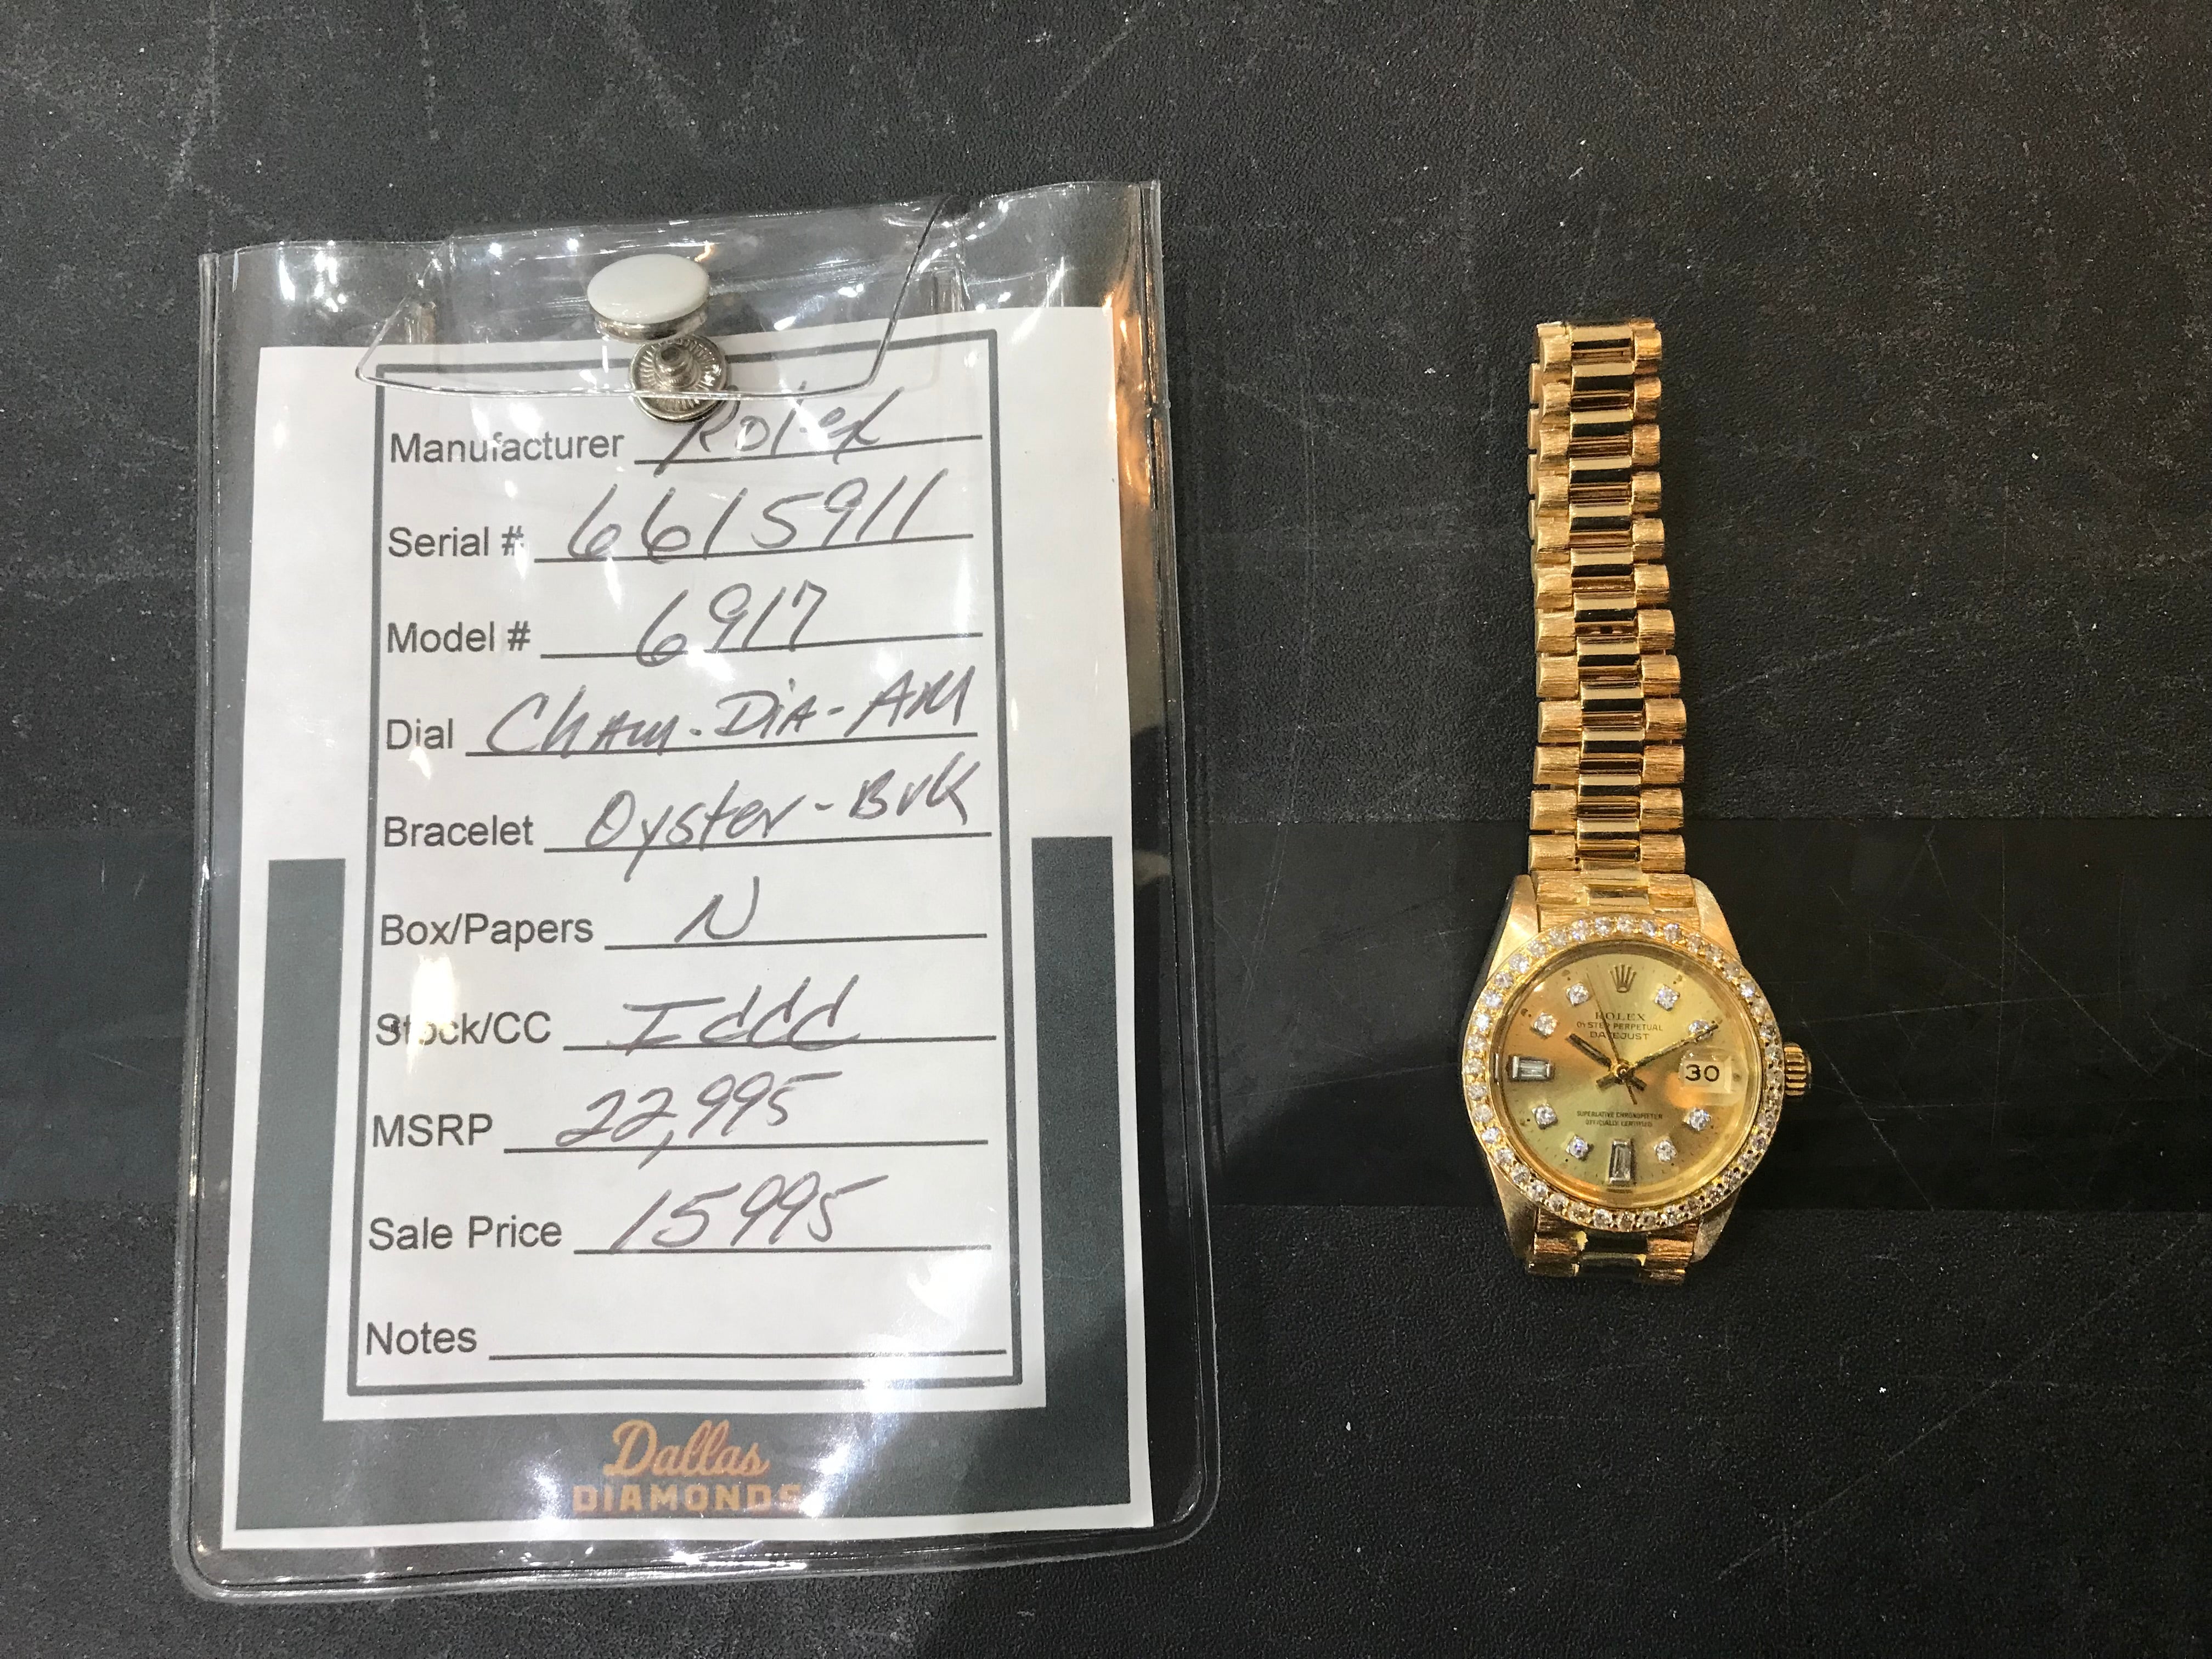 ROLEX OYSTER PERPETUAL DATEJUST 18K Yellow Gold Watch